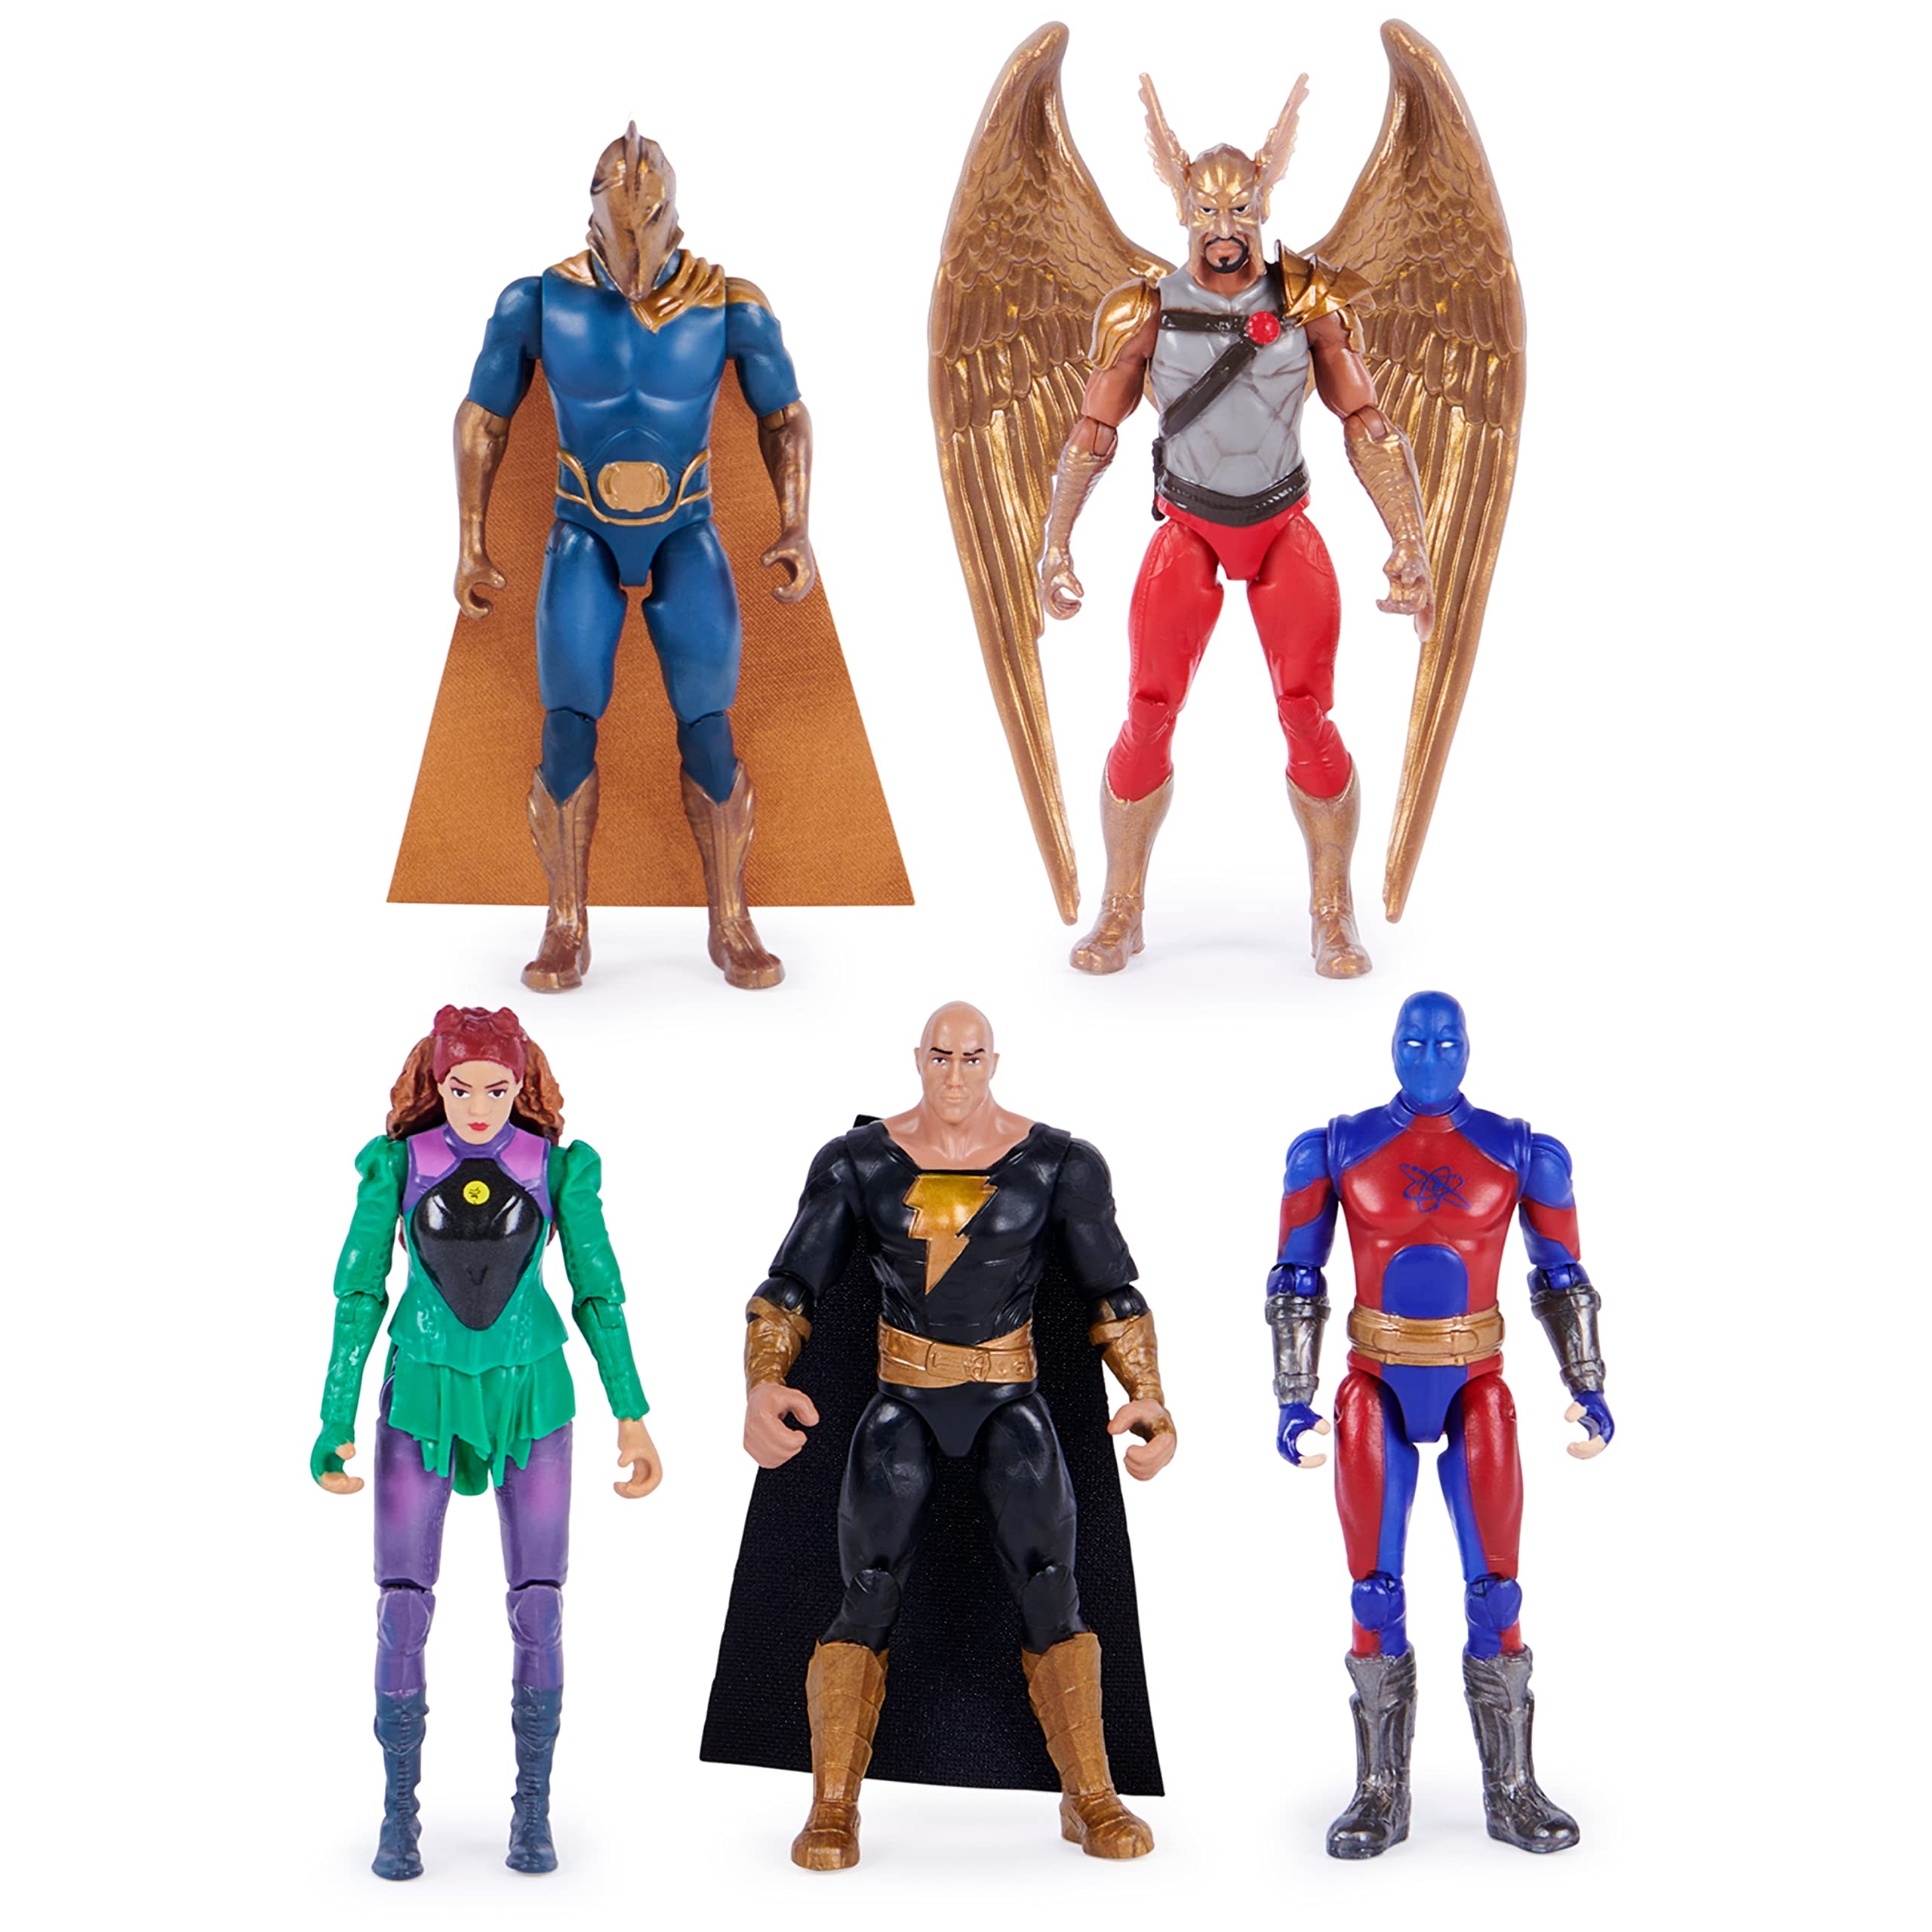 4" DC Comics Black Adam and Justice Society Action Figure Set $16.80 + Free Shipping w/ Prime or on $25+